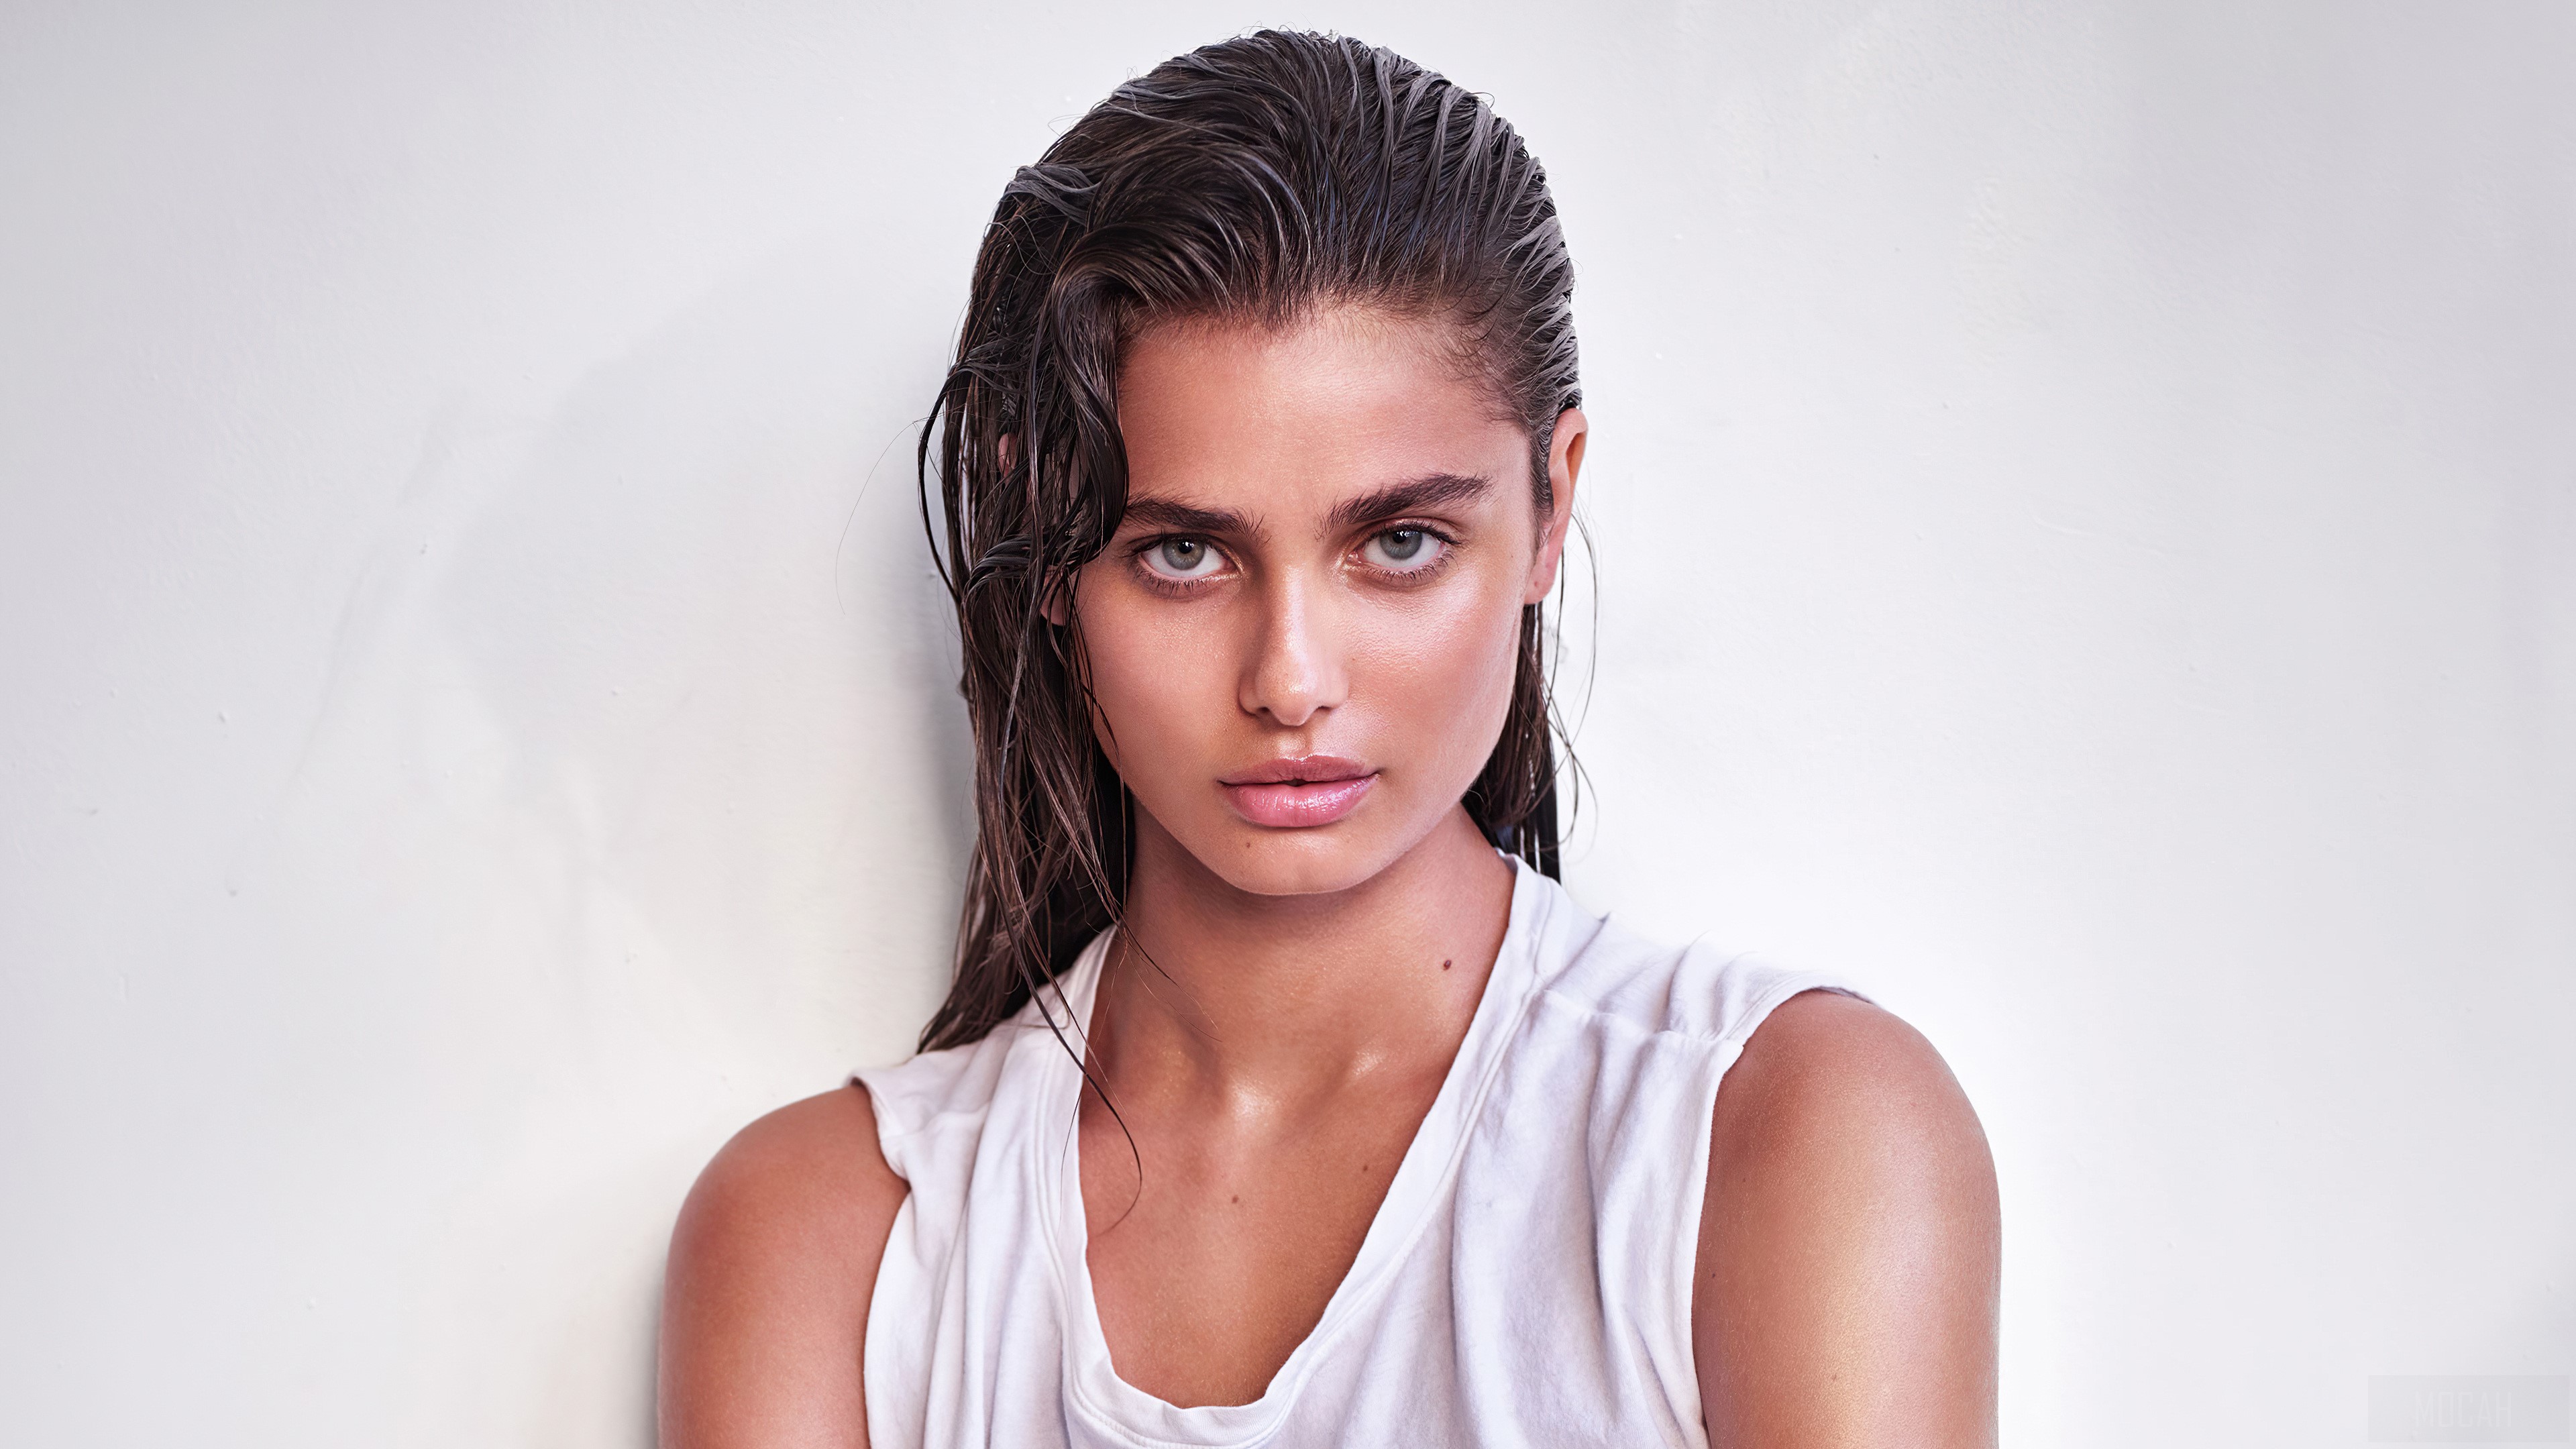 Model Taylor Hill Wallpapers